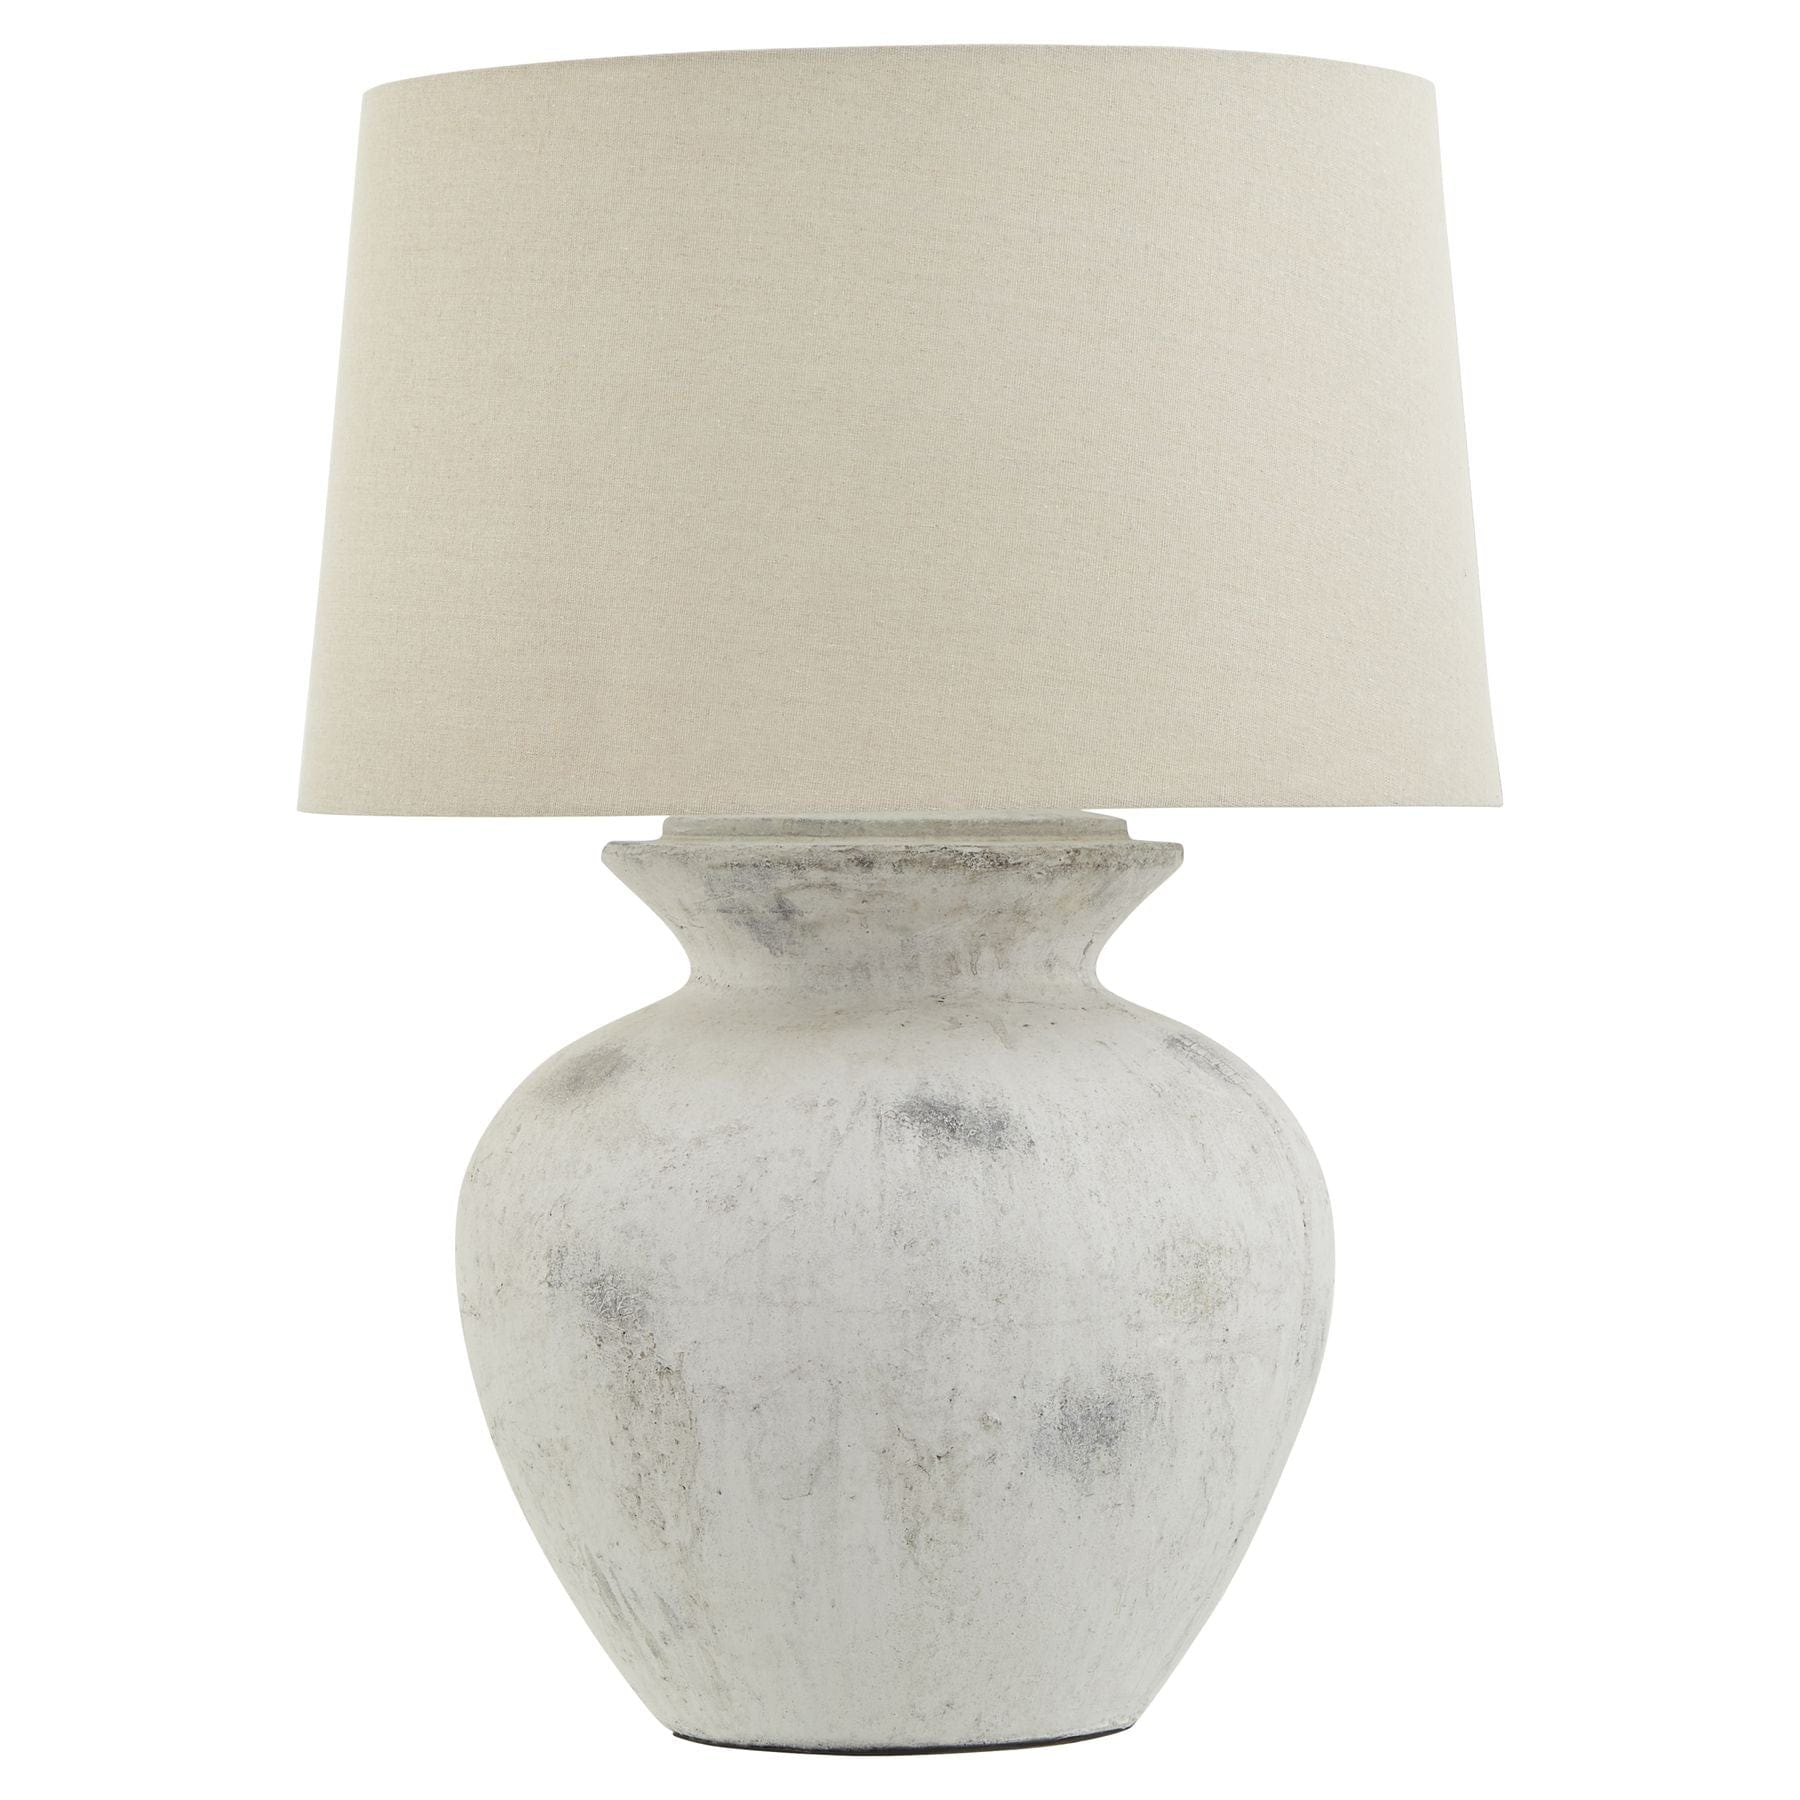 Hill Interiors Table Lamp Downton Antique White Table Lamp